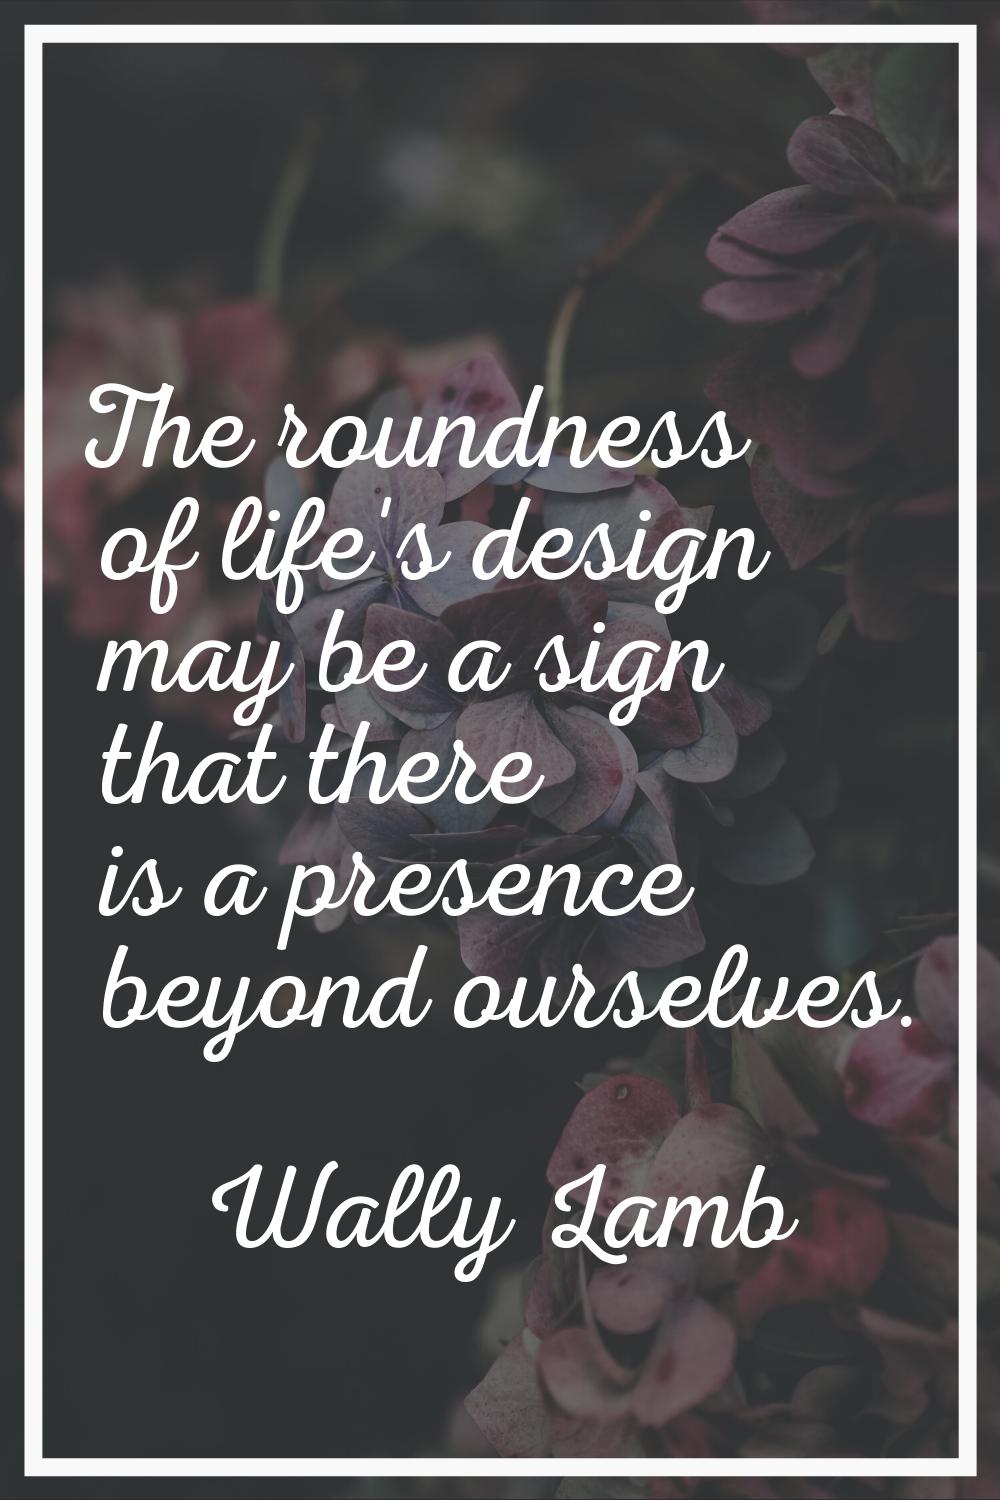 The roundness of life's design may be a sign that there is a presence beyond ourselves.